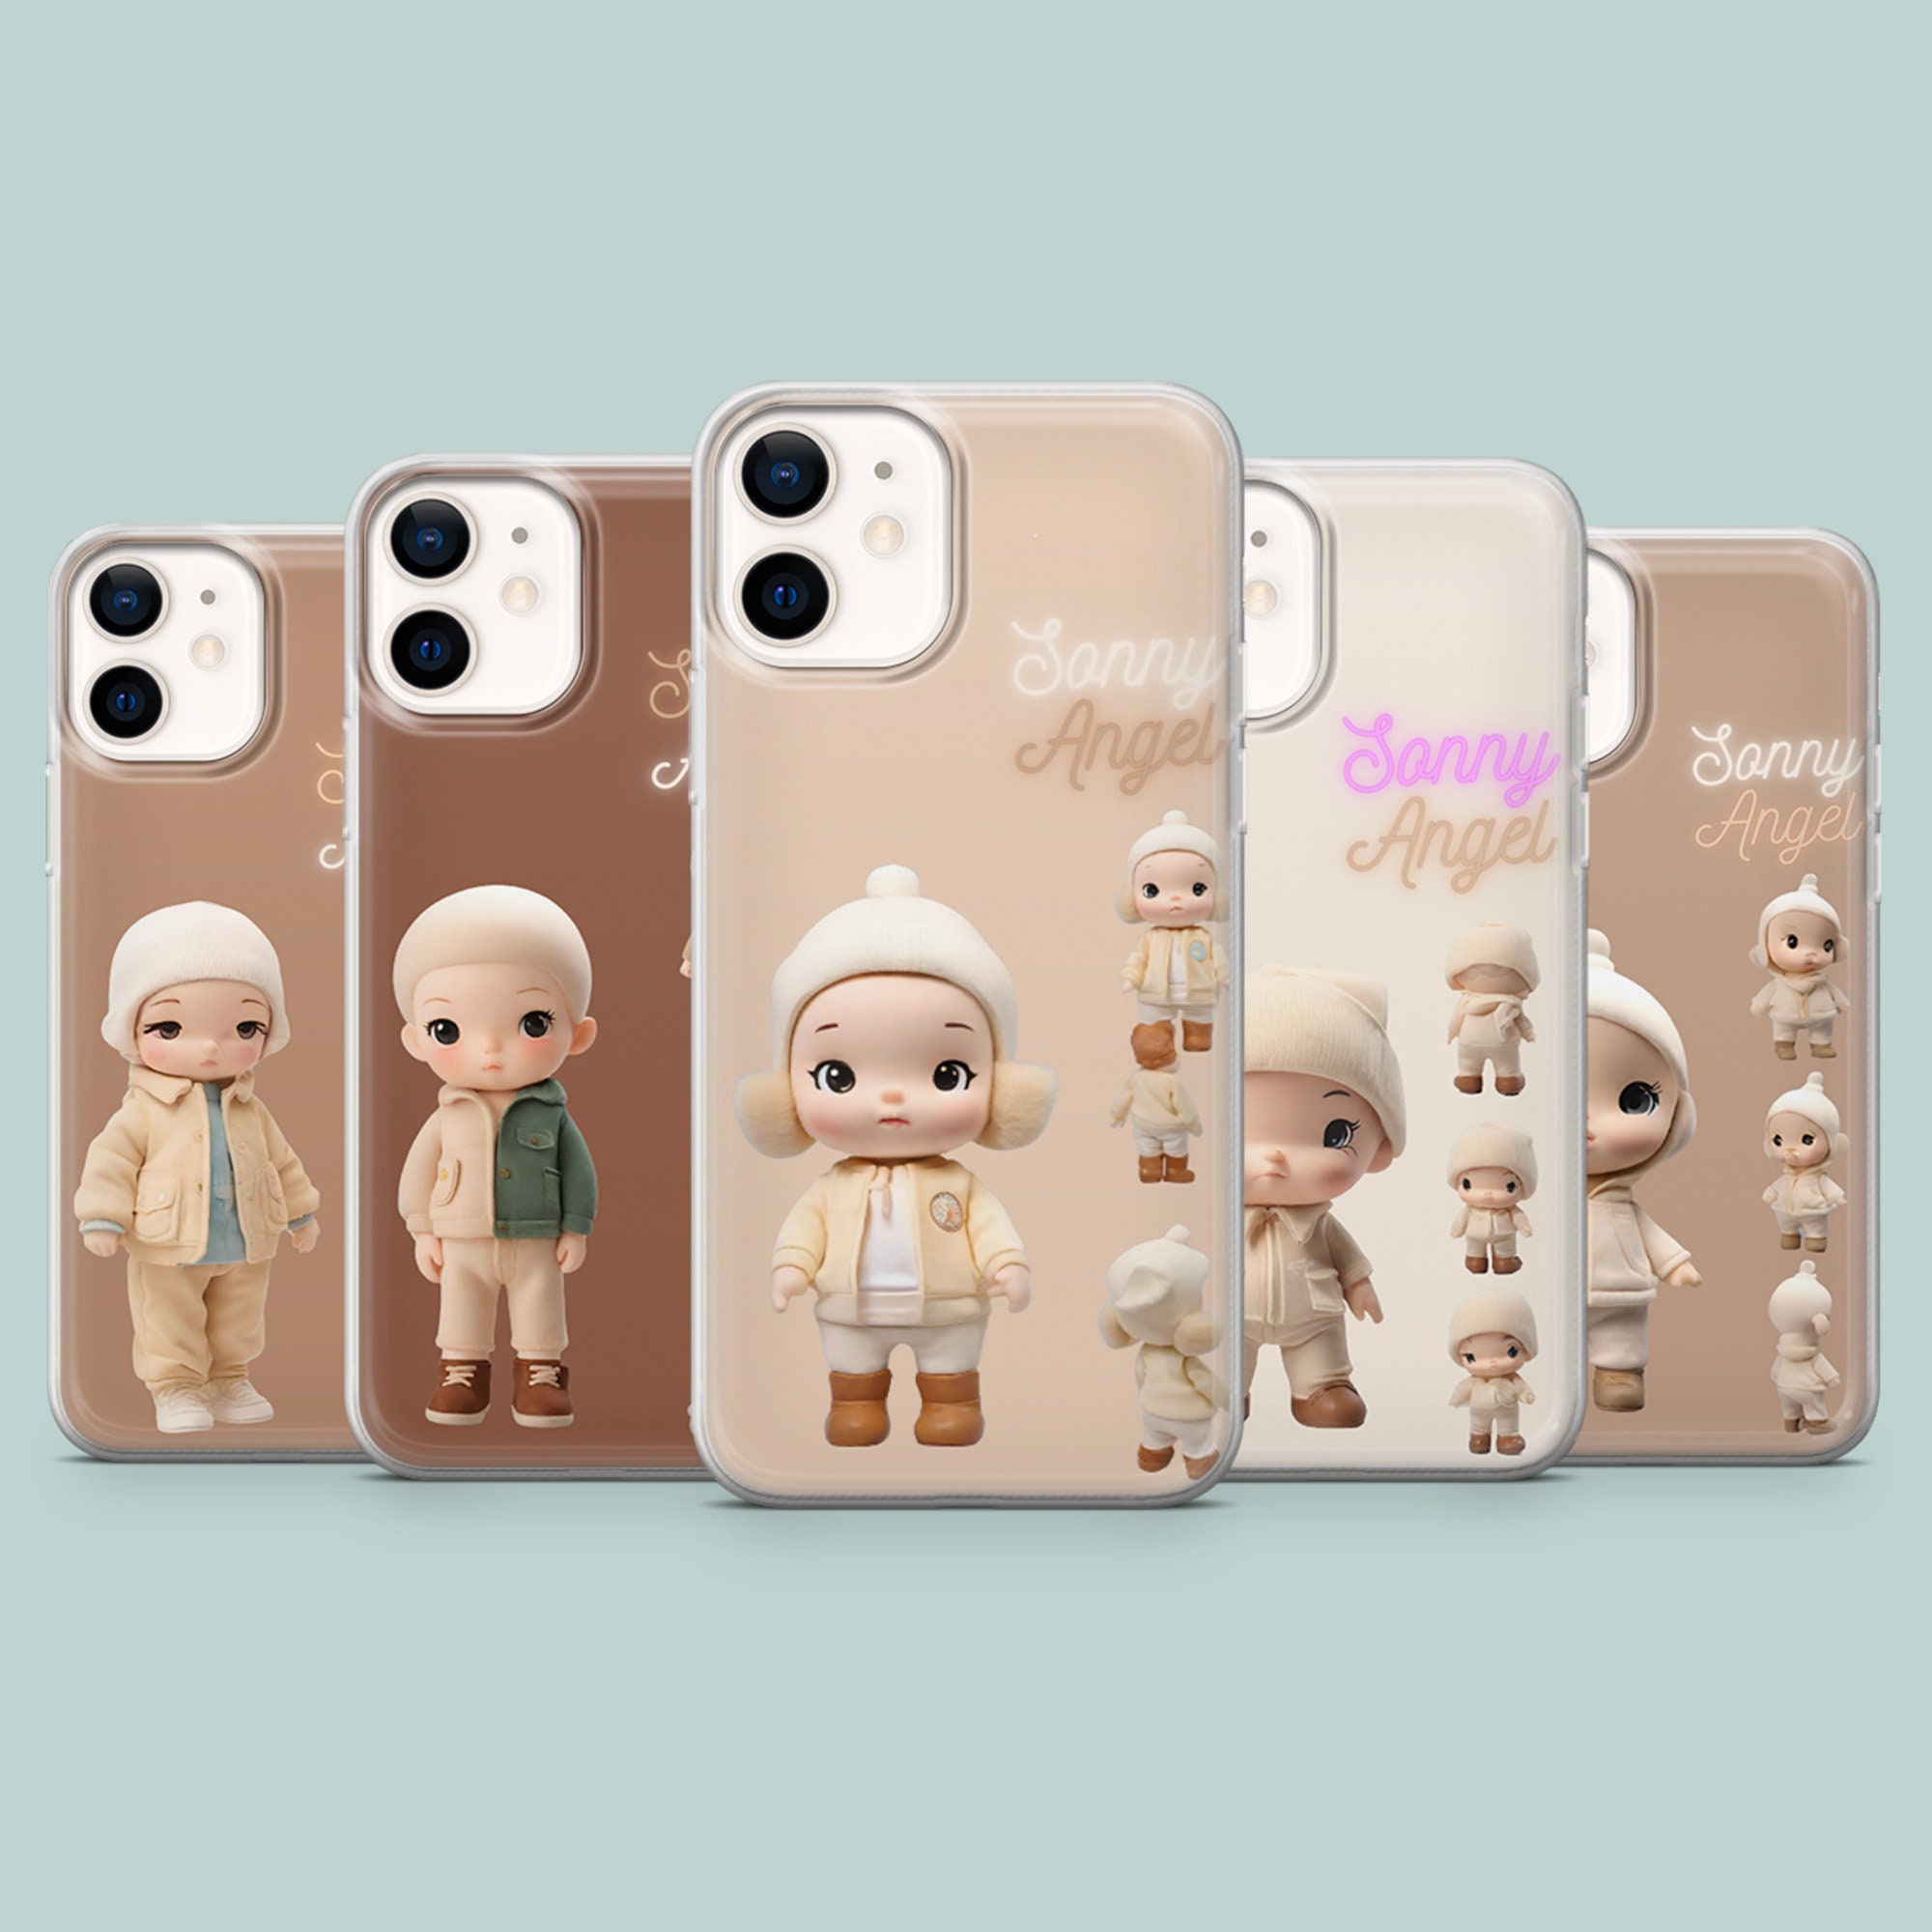 sonny angel hippers  Cute phone cases, Sonny angel, Pretty phone cases